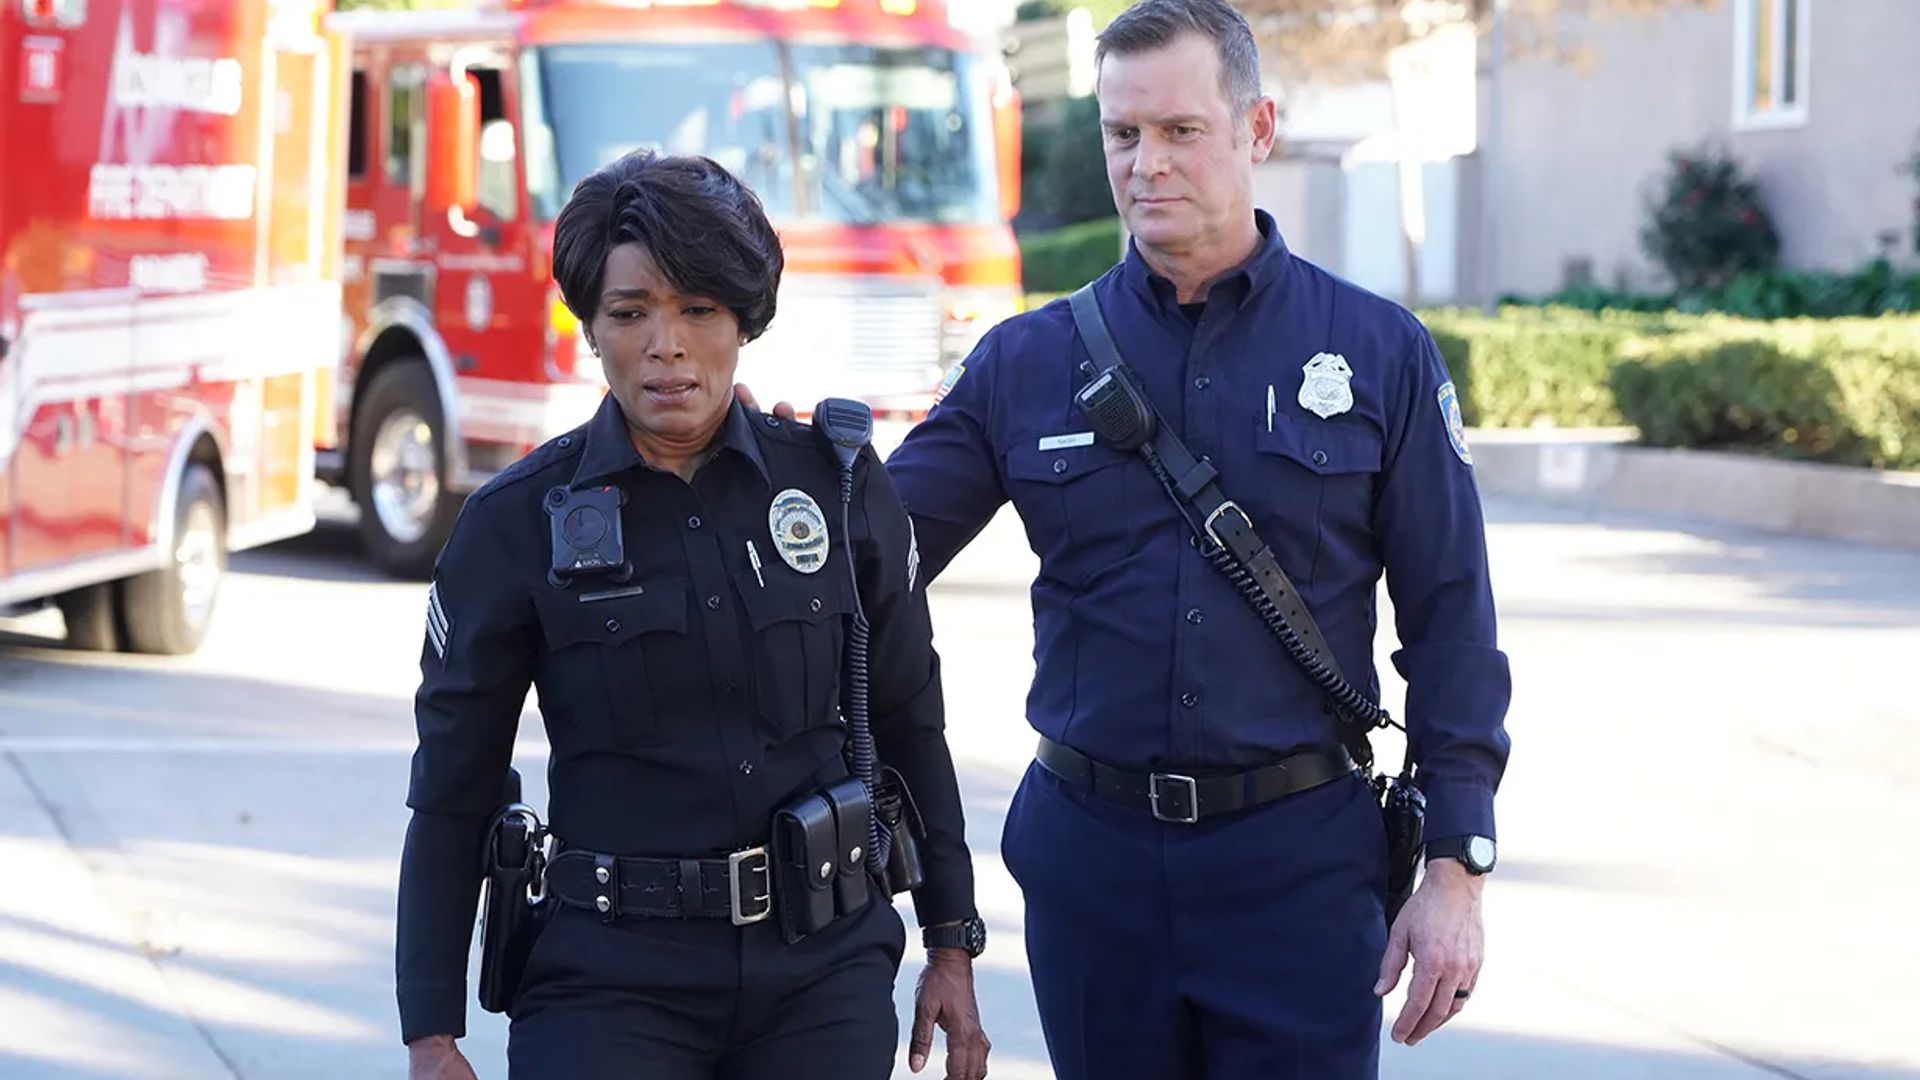 Bobby and Athena in 9-1-1